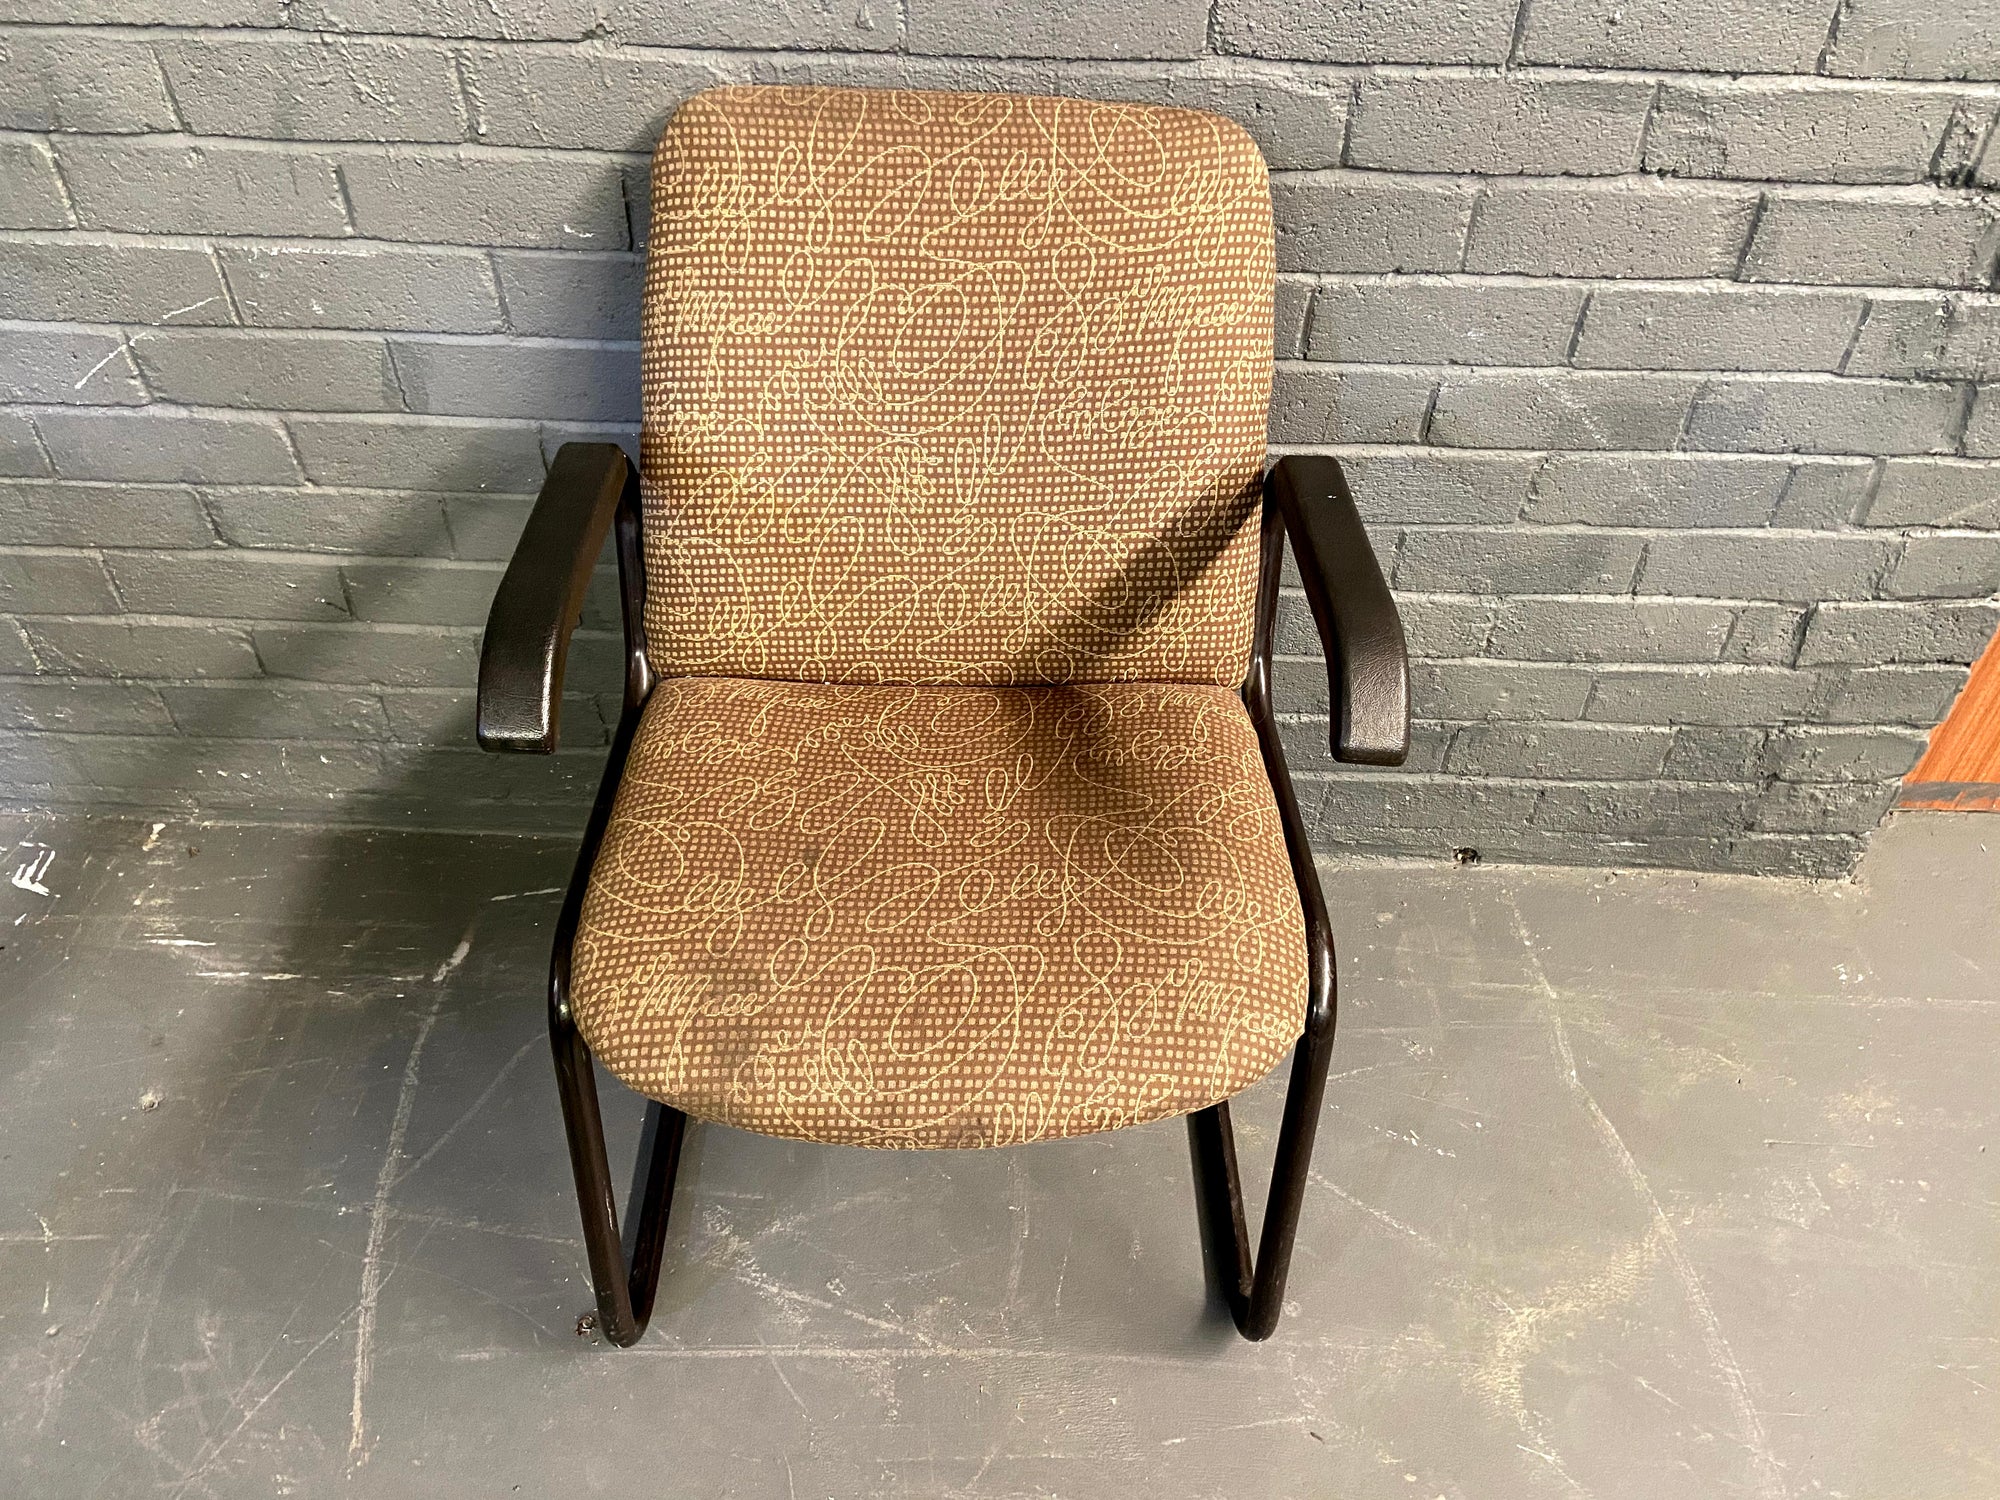 Brown Office Chair - 2ndhandwarehouse.com